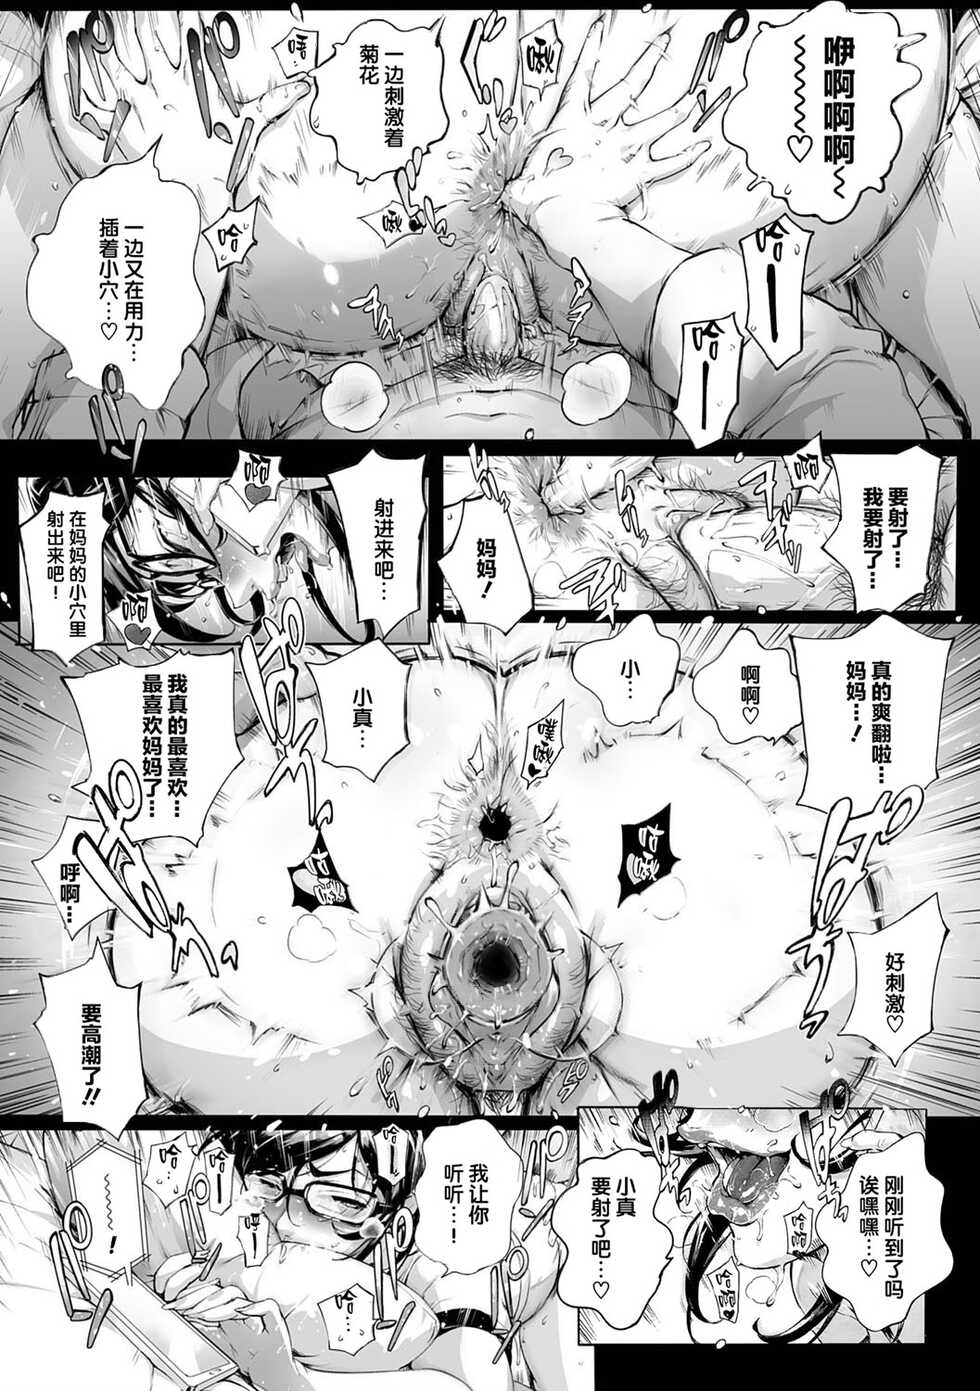 [Oltlo] Wagamama Steady (COMIC Anthurium 027 2015-07) [Chinese] [EVENING个人改图+丧尸×无毒汉化] [Decensored] [Digital] - Page 29